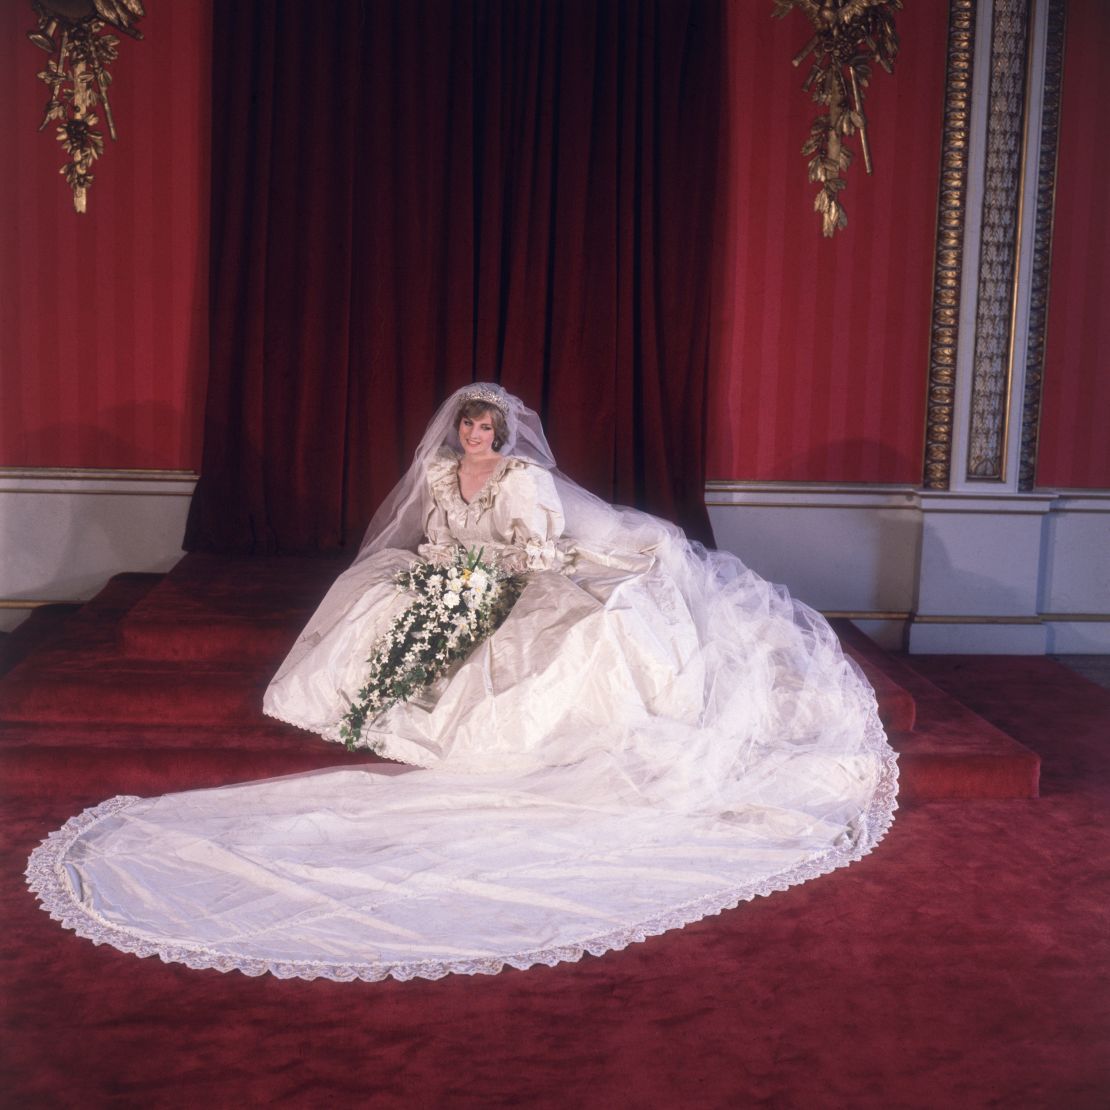 Diana wears the dress on her wedding day in 1981.